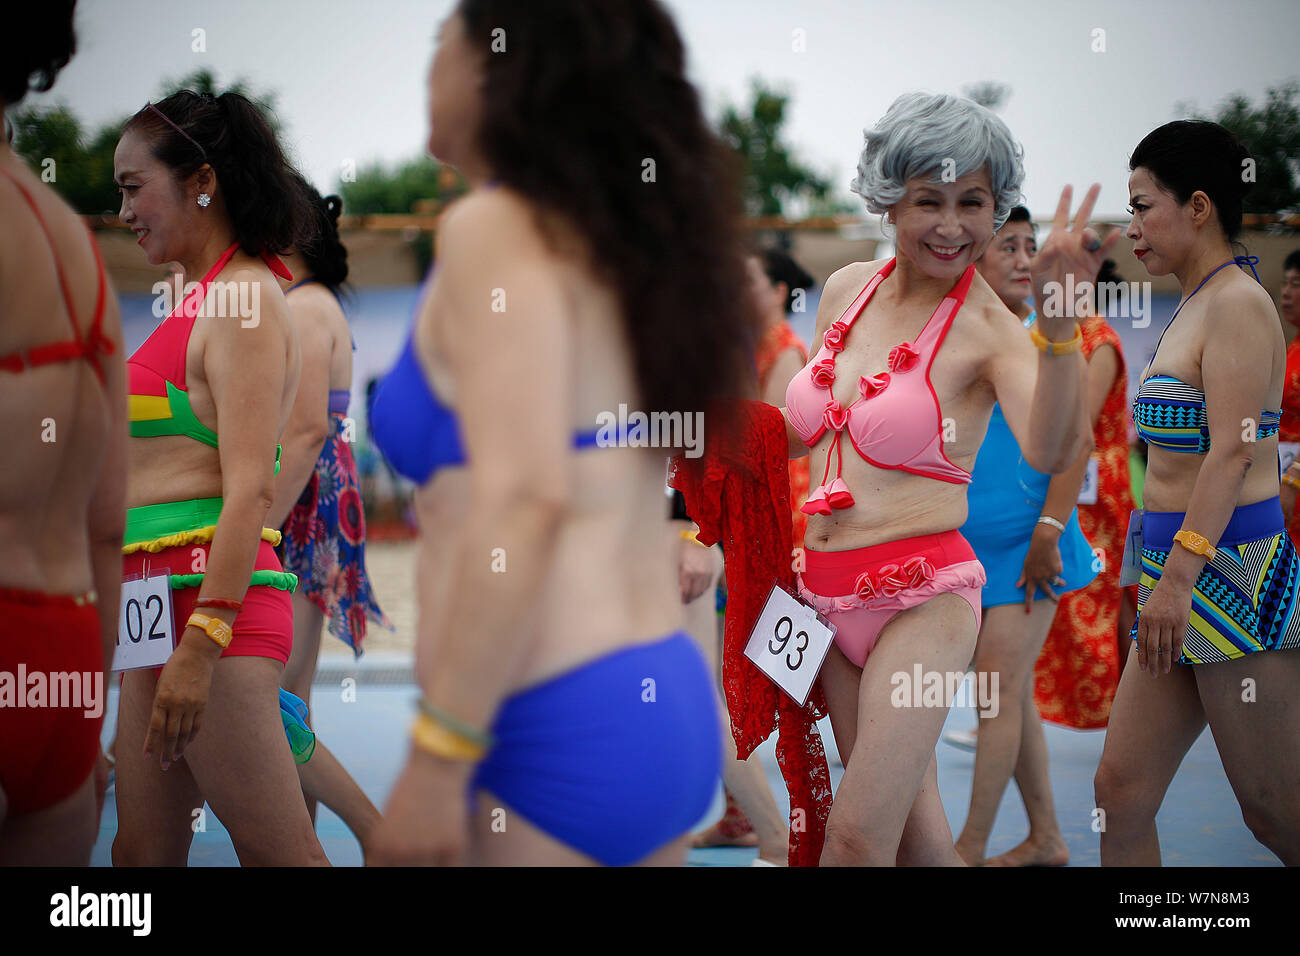 Elderly Chinese women dressed in bikini pose during a middle-aged